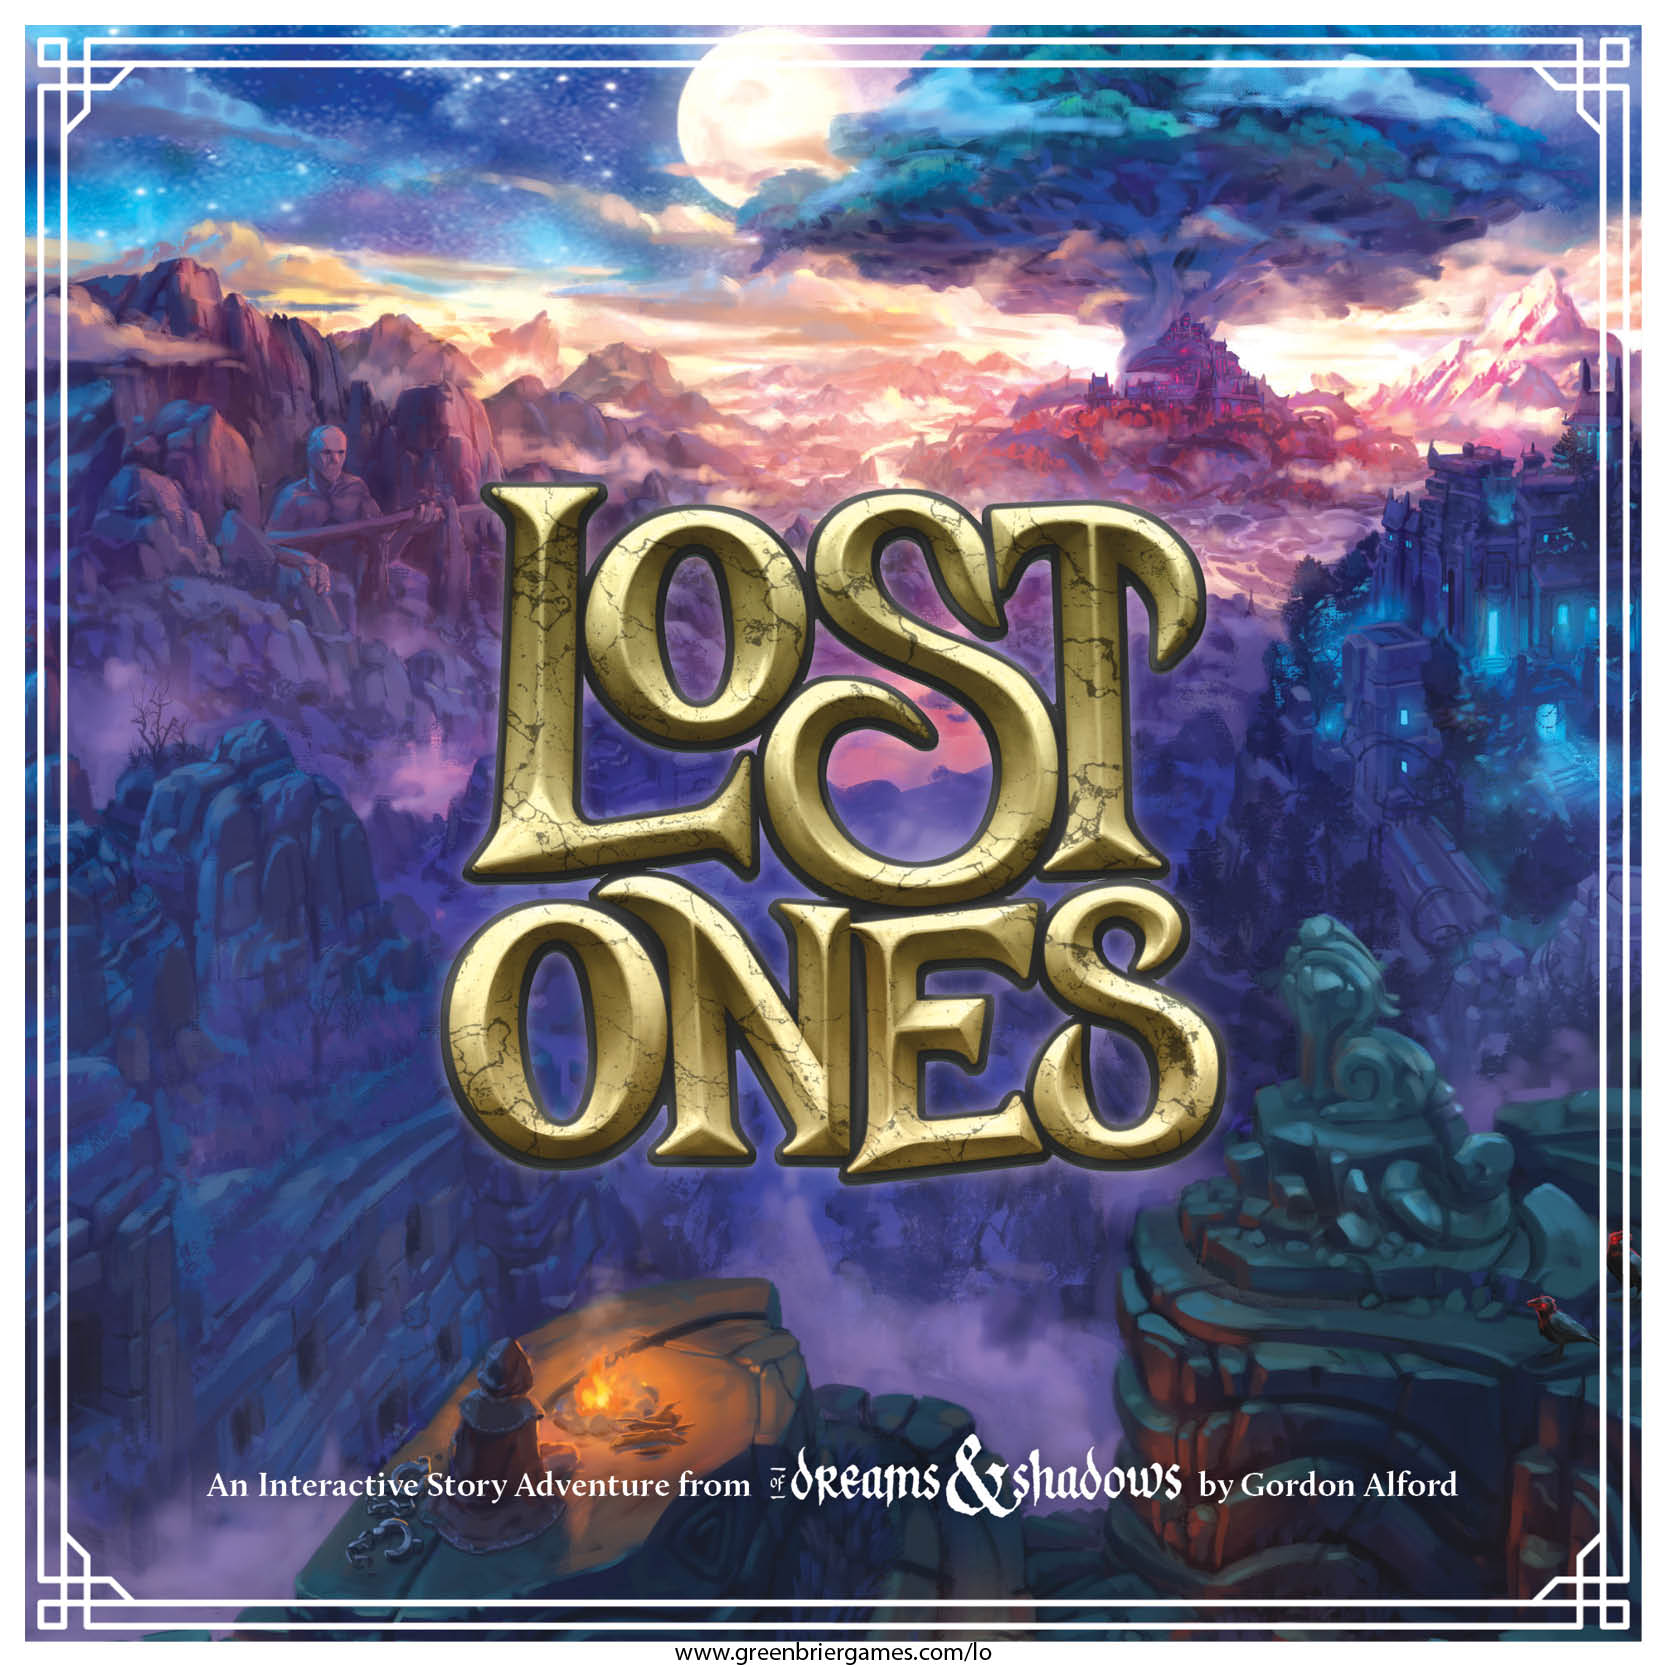 THE LOST ONES